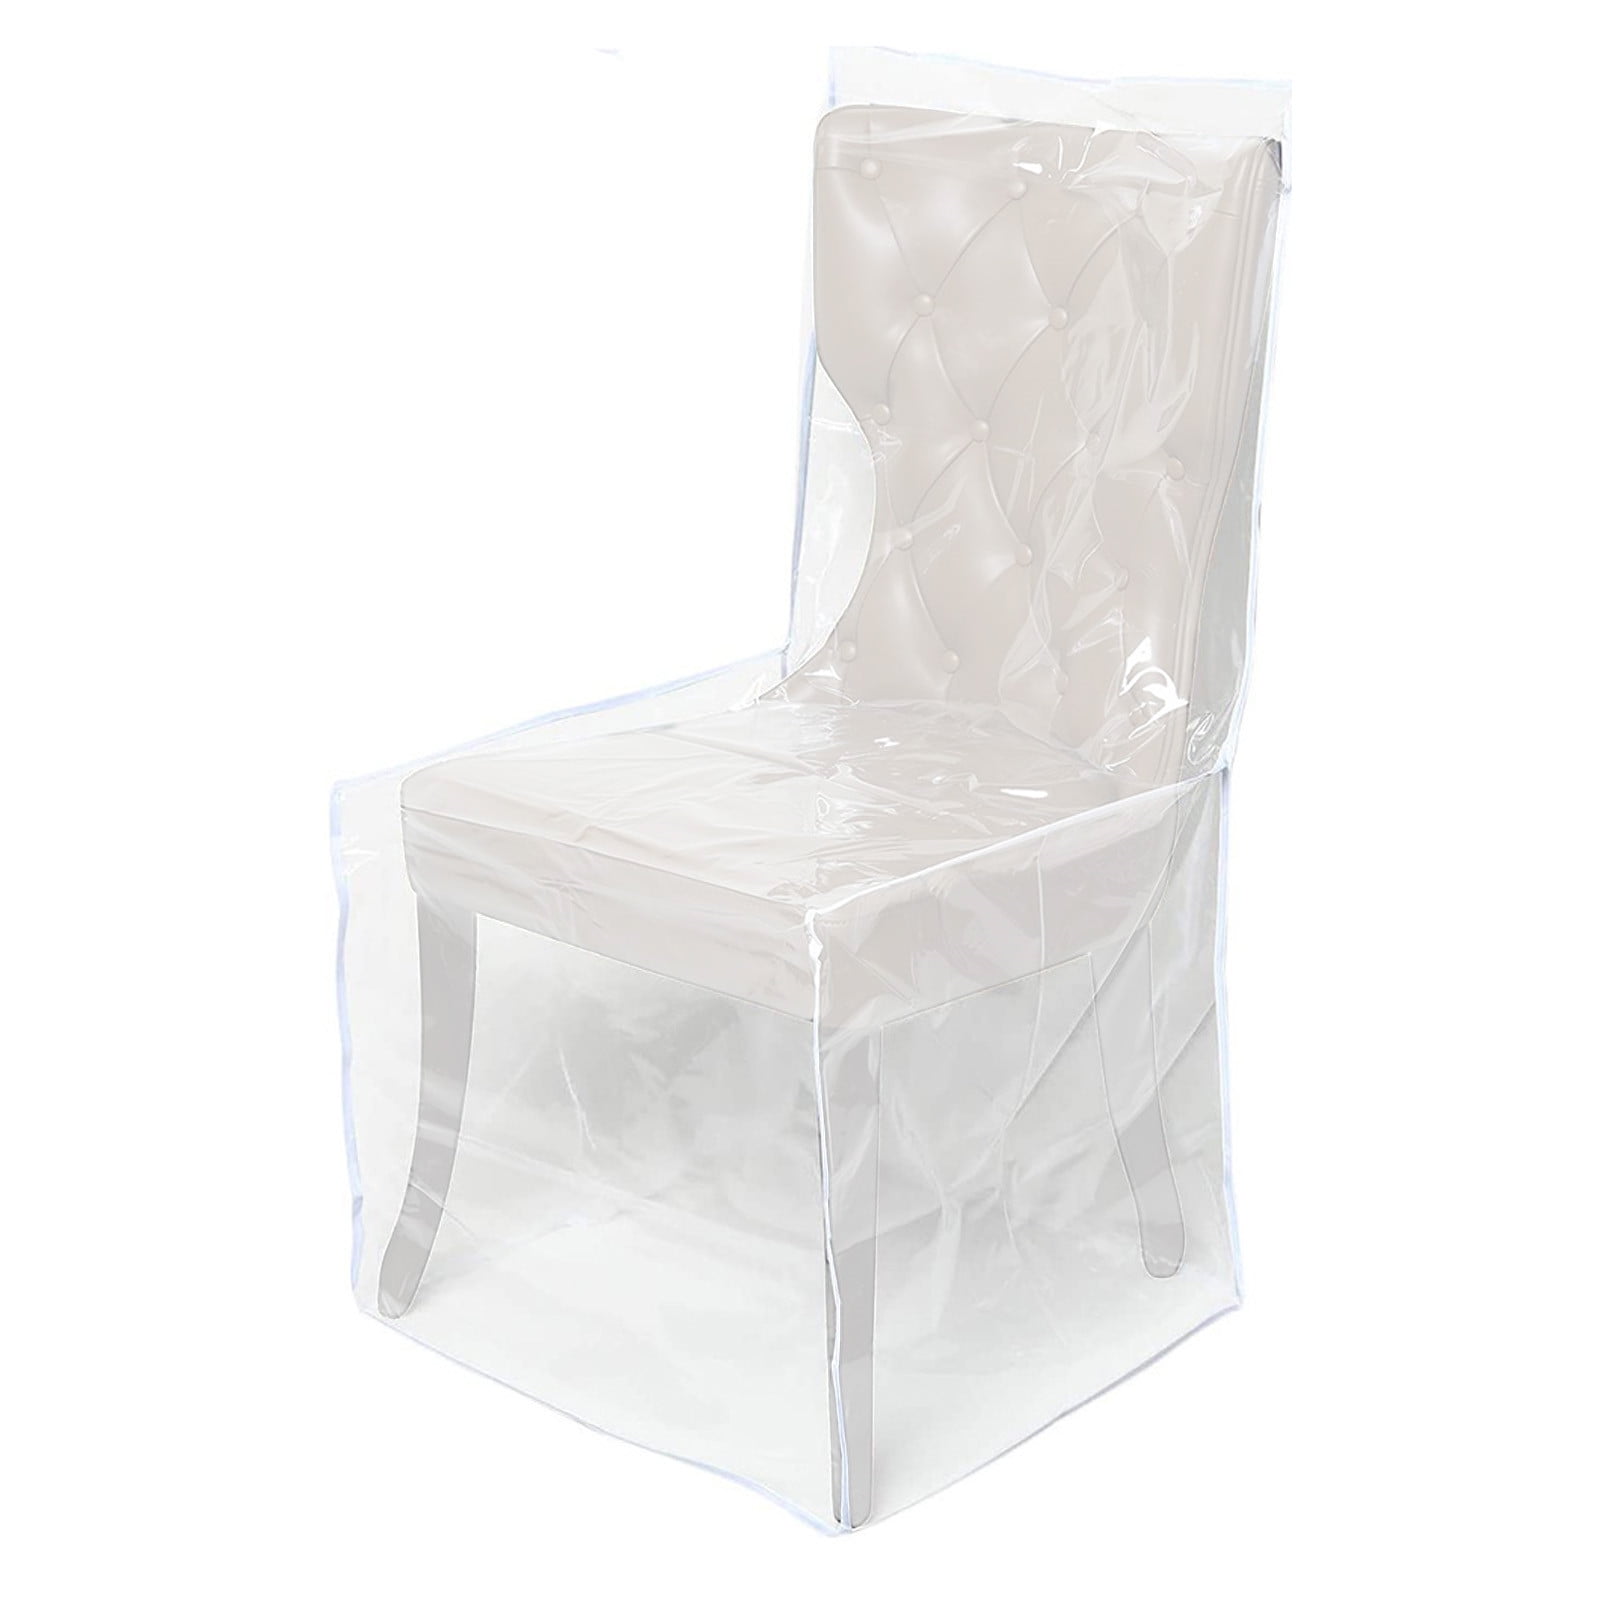 Details about   Chair Cover Dining Room Protector-Clear-No Dust/Spill/Pet Hair/Pet Claws Set 